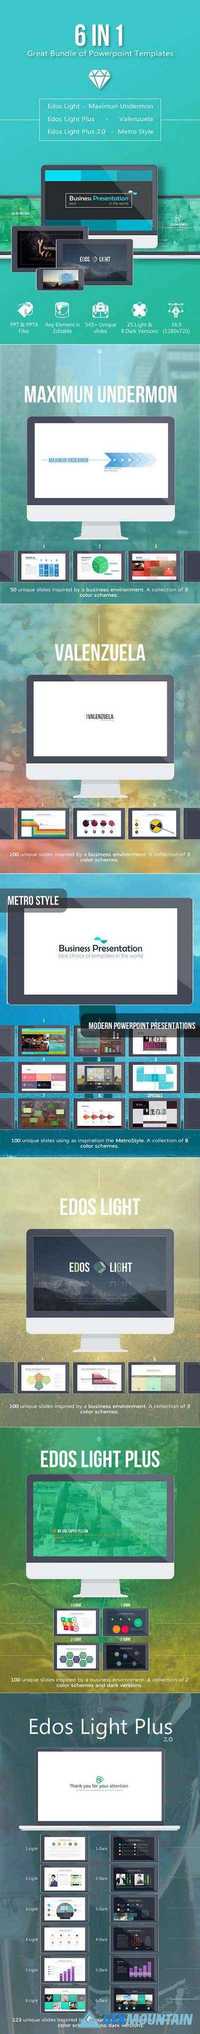 GraphicRiver - 6 in 1 Bundle PowerPoint 12606795